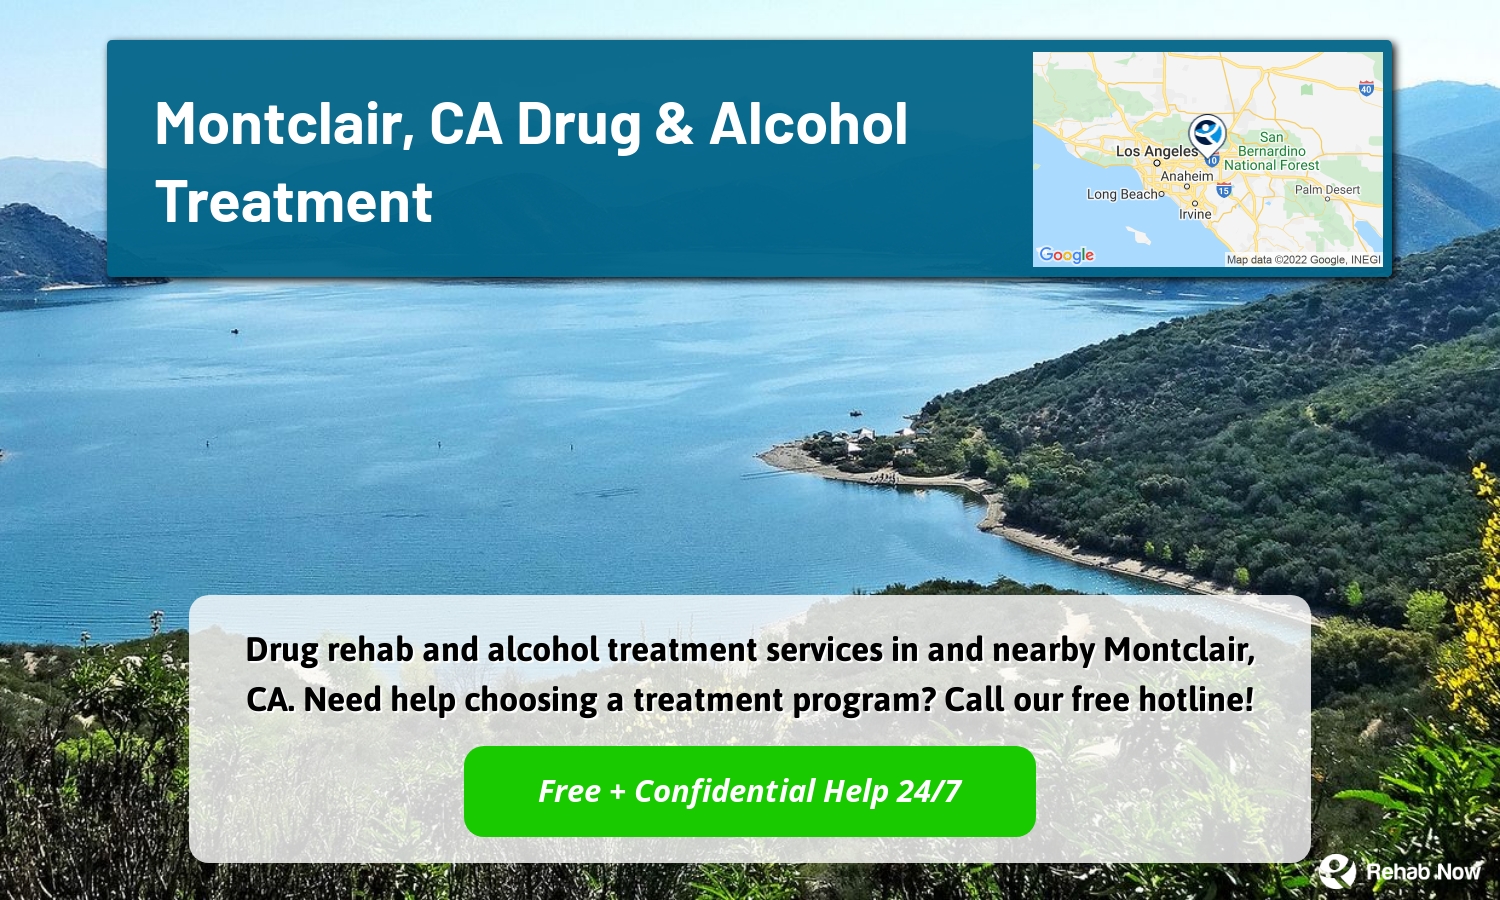 Drug rehab and alcohol treatment services in and nearby Montclair, CA. Need help choosing a treatment program? Call our free hotline!